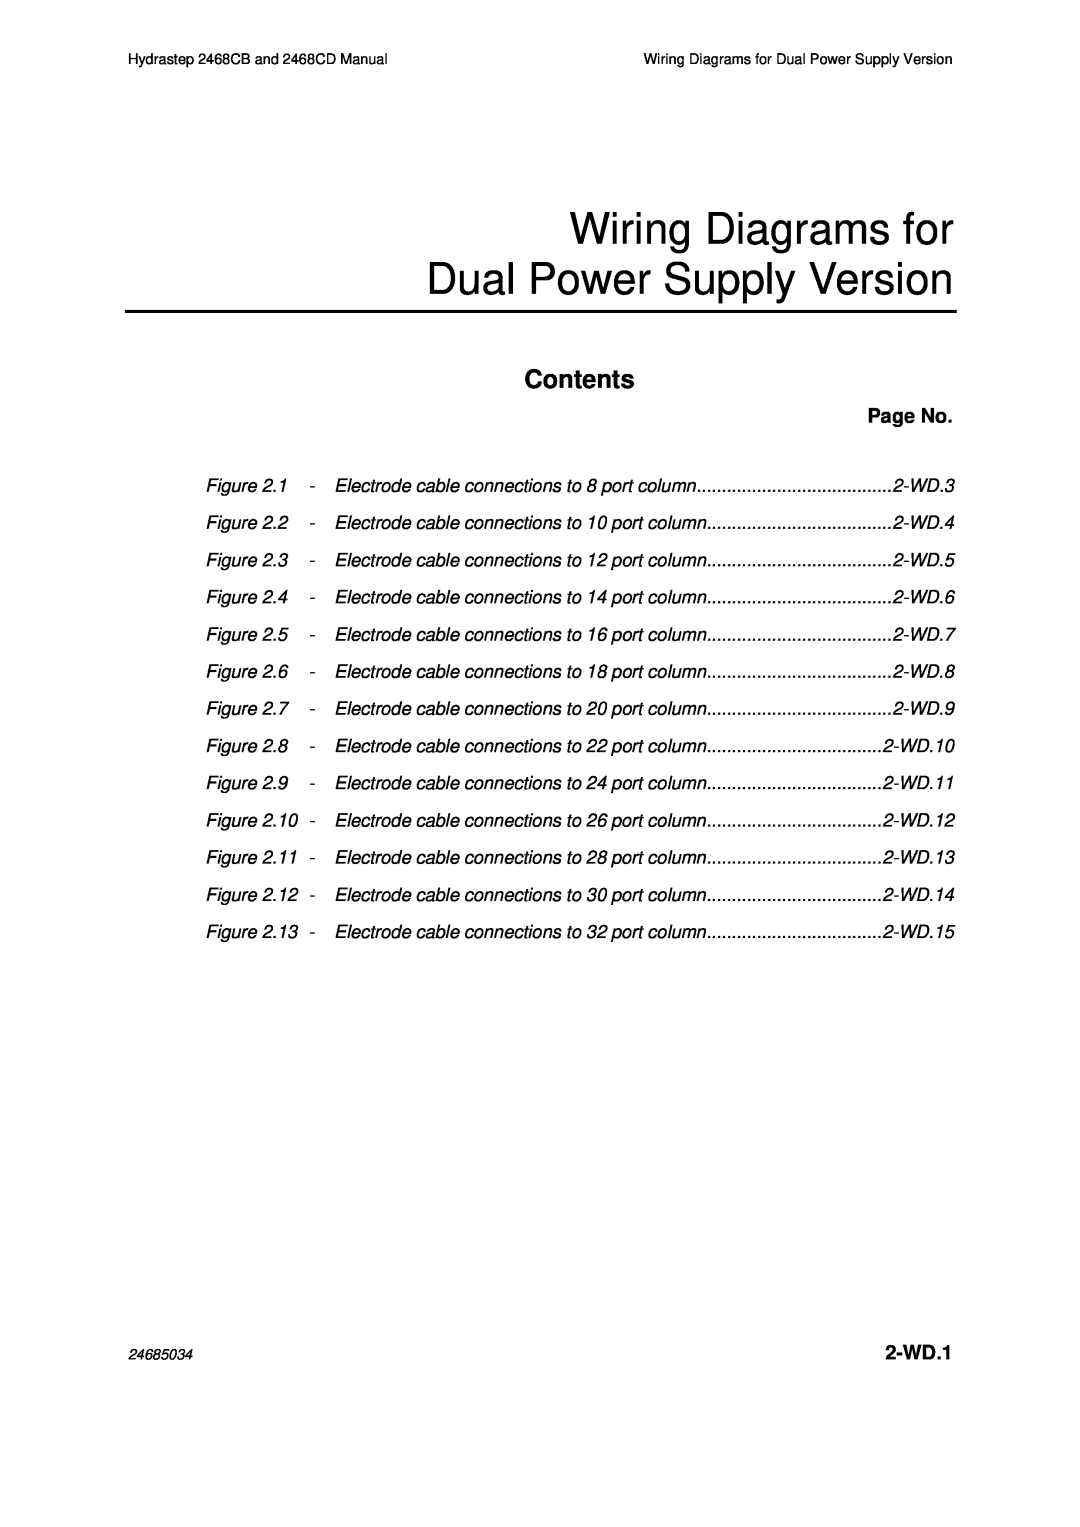 Emerson 2468CD, 2468CB manual Wiring Diagrams for Dual Power Supply Version, Contents, 2-WD.1, Page No 